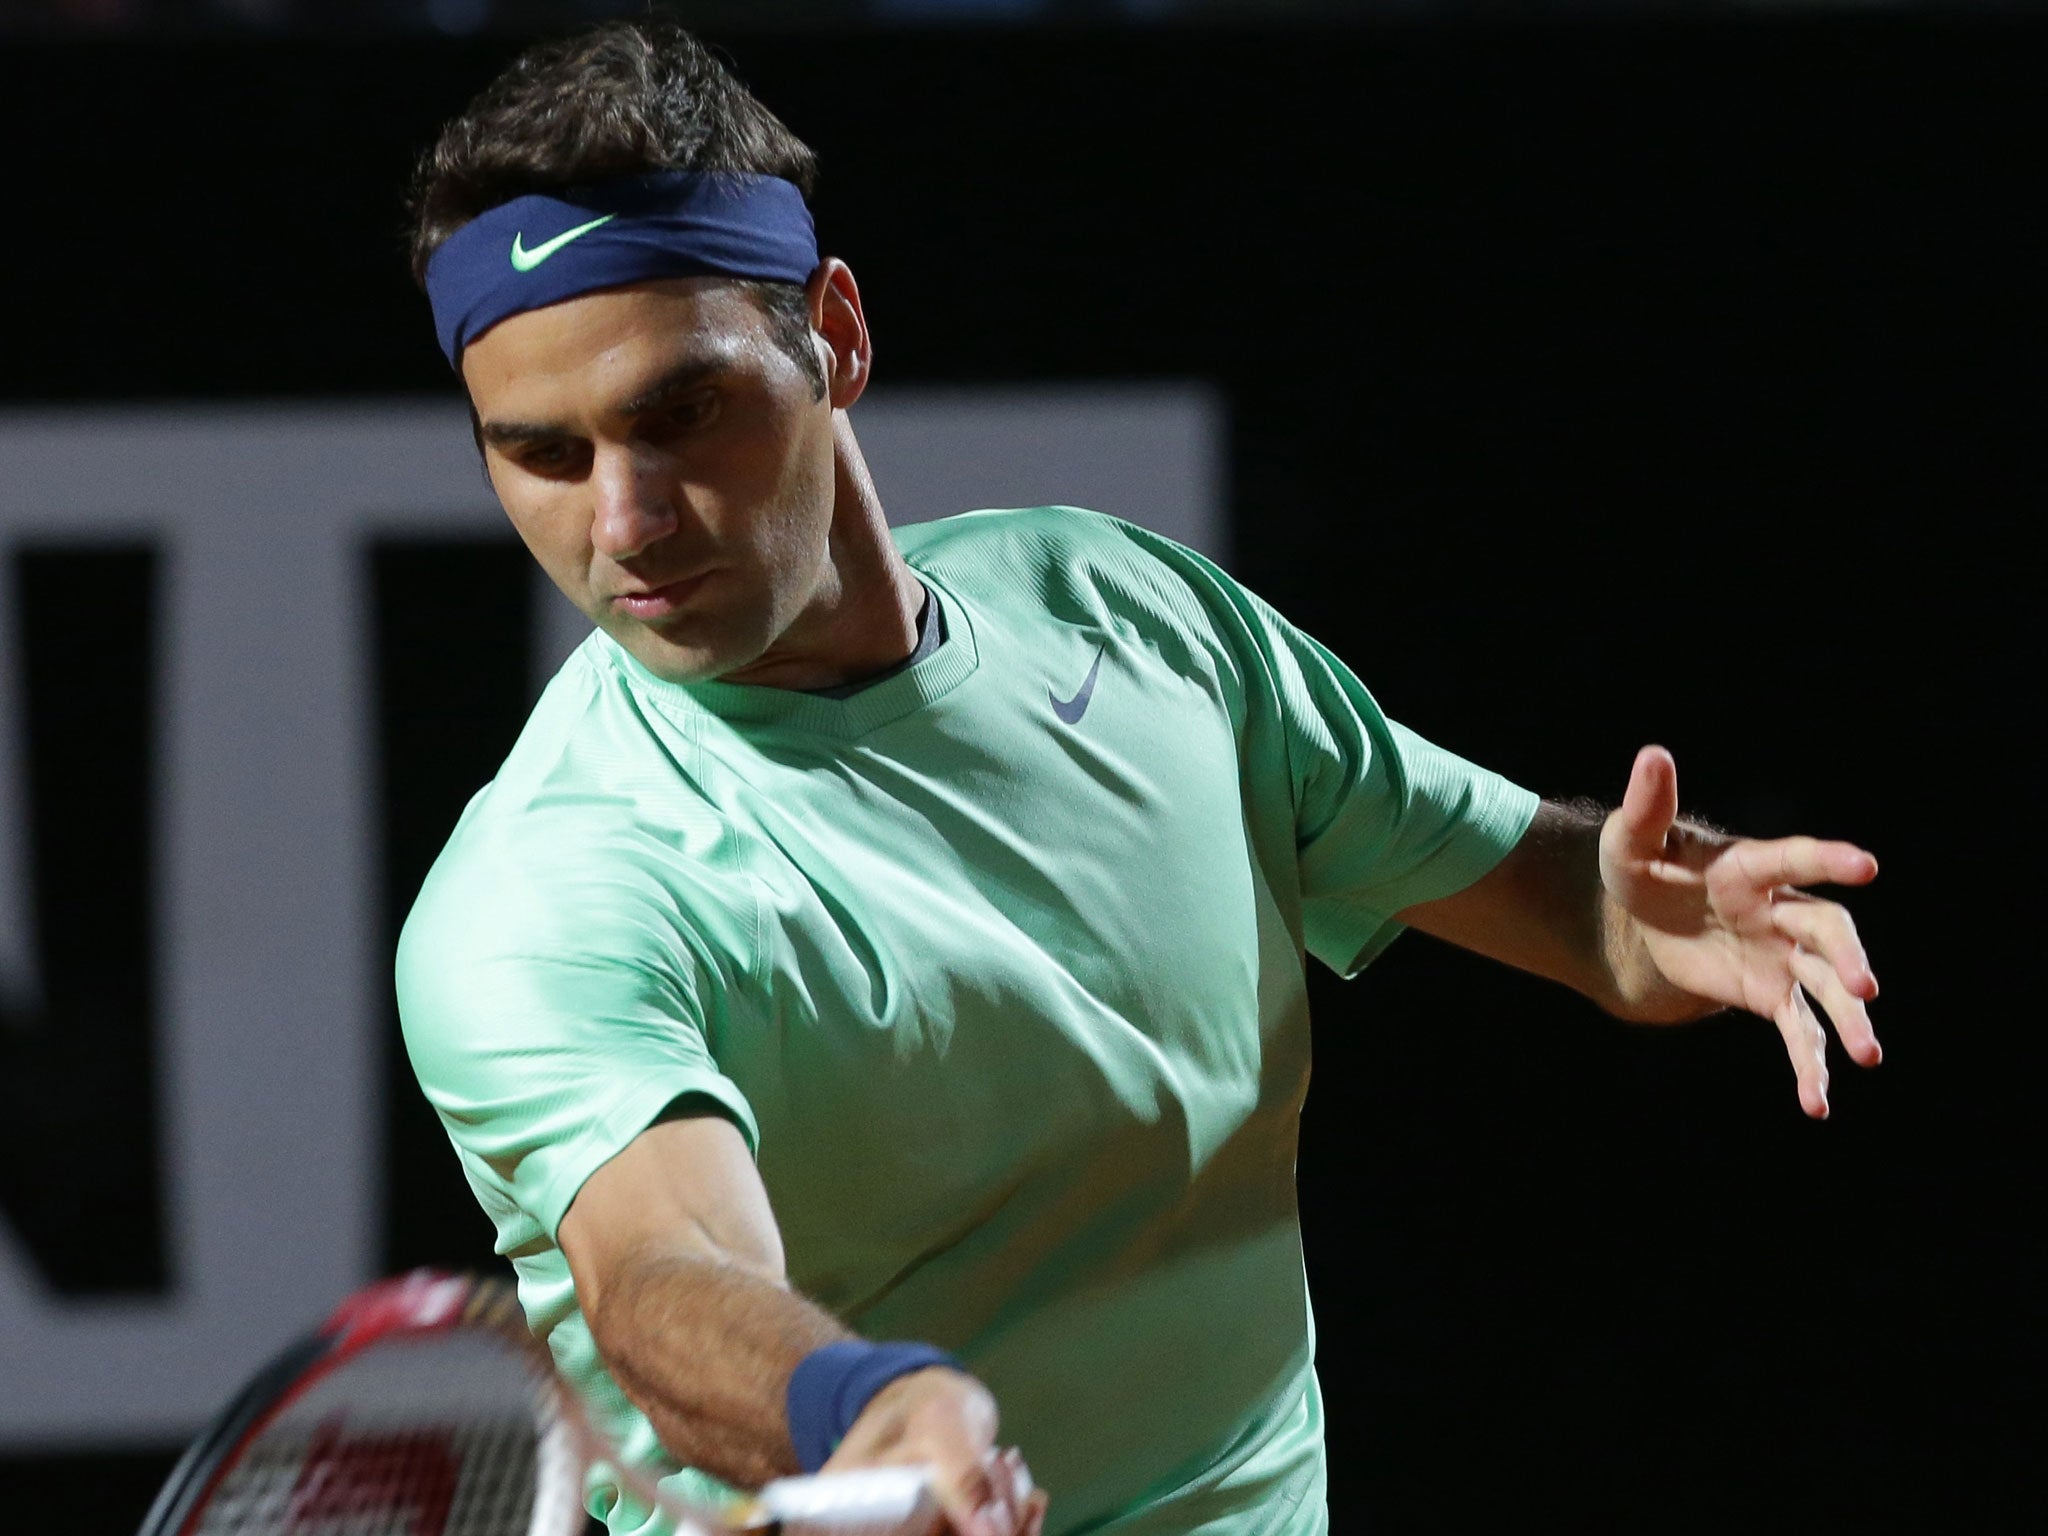 Roger Federer has the easiest draw of the front-runners